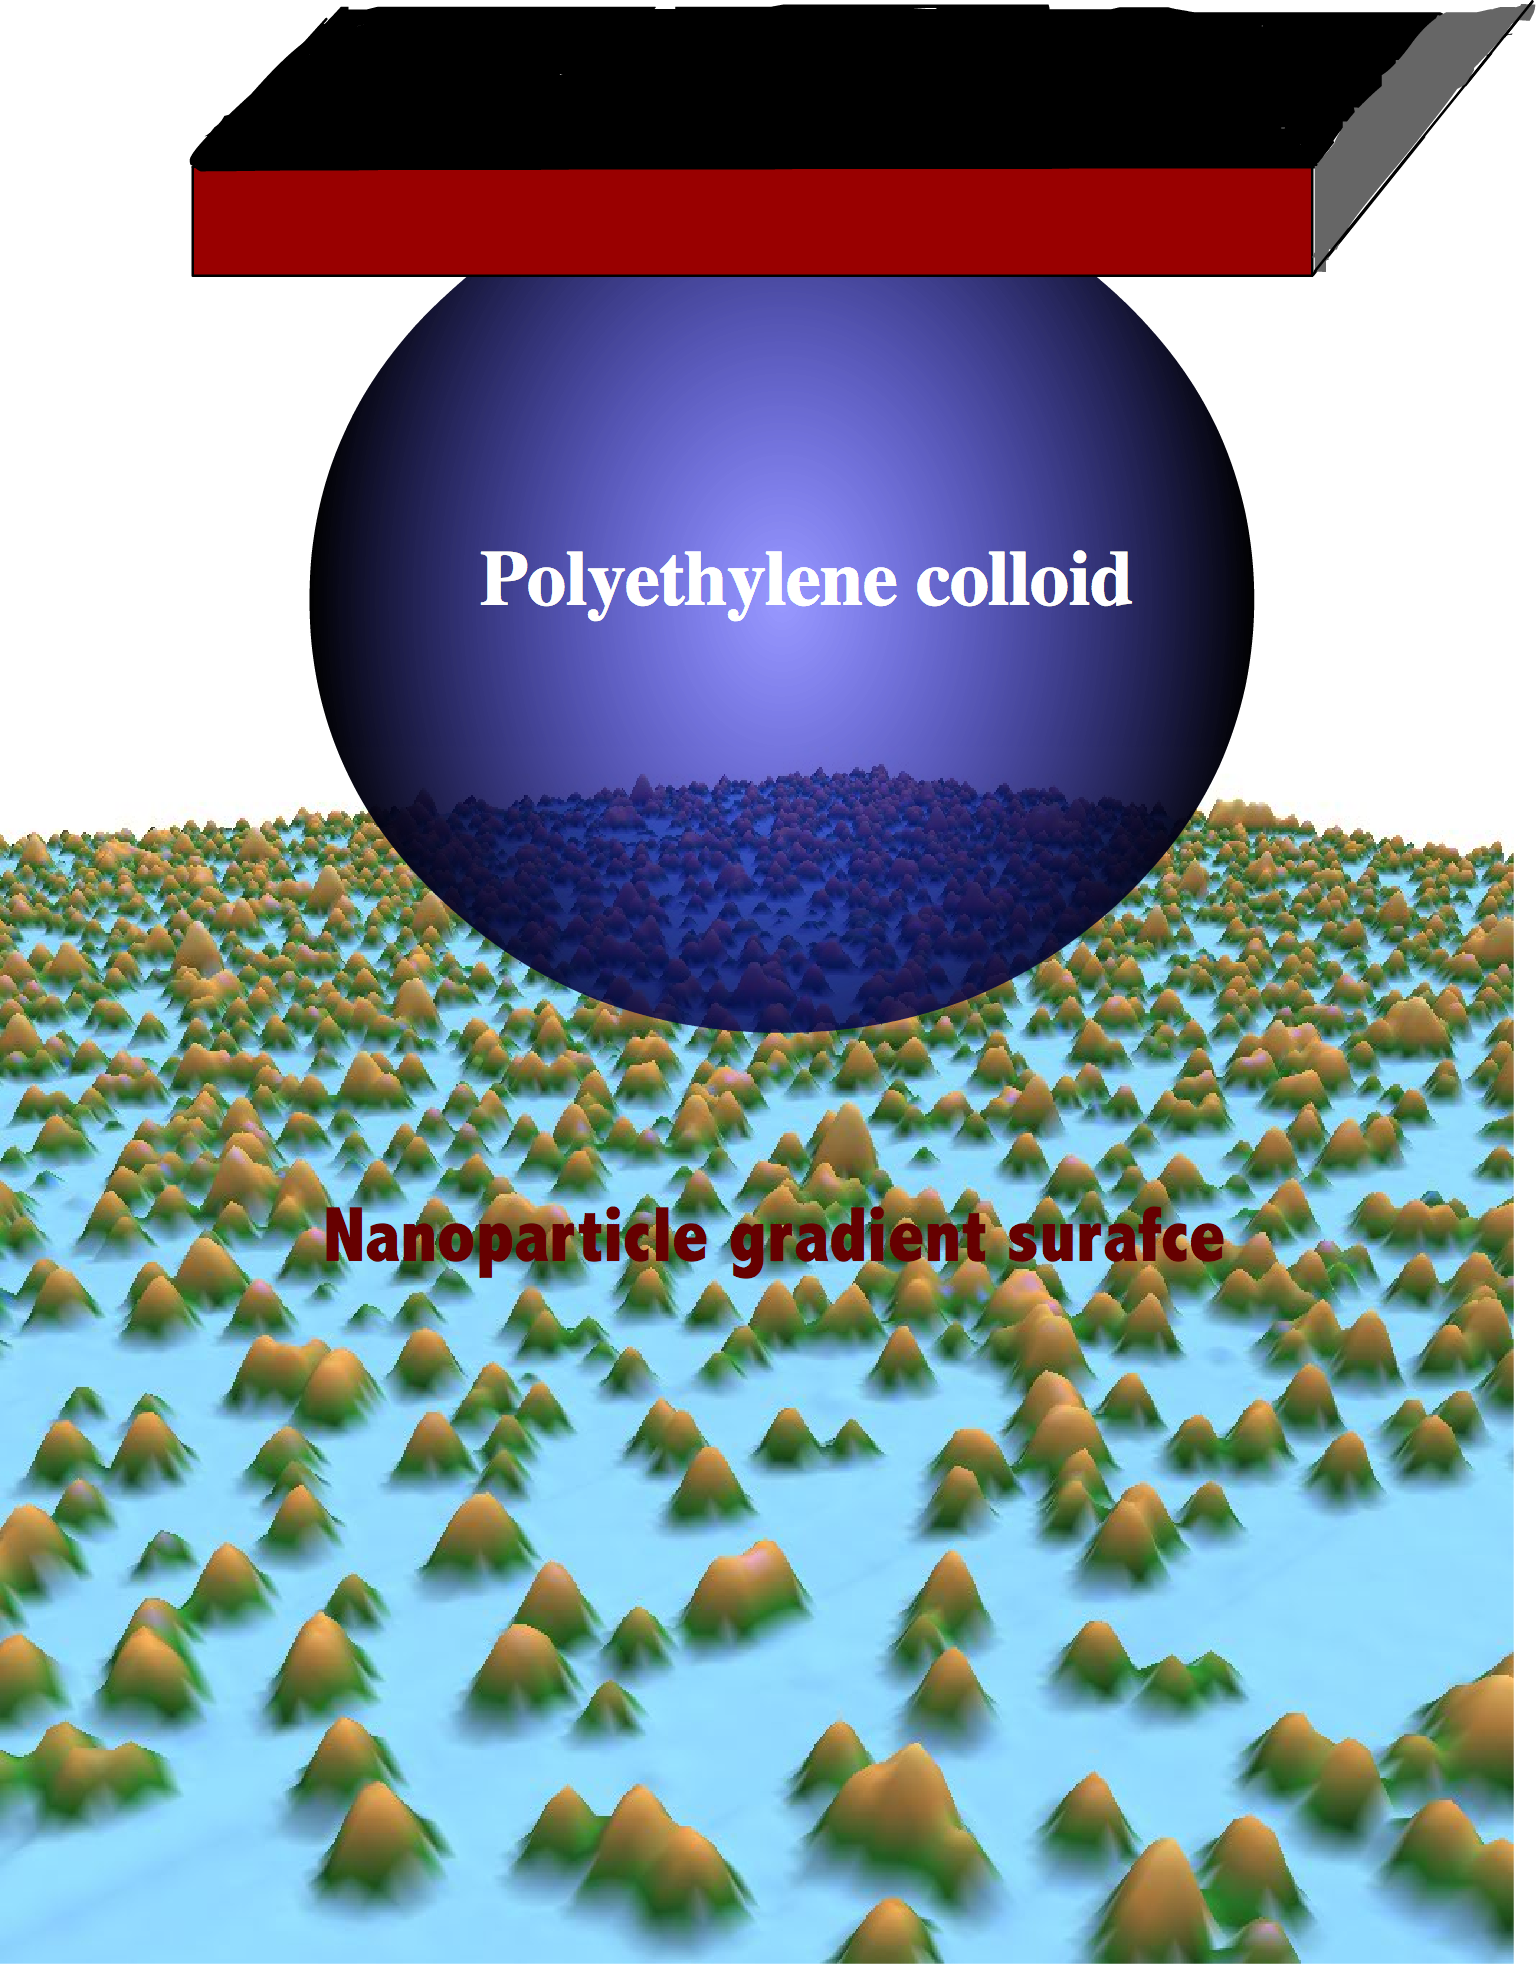 Enlarged view: Schematic of colloid probe AFM on nanoparticle gradient surface